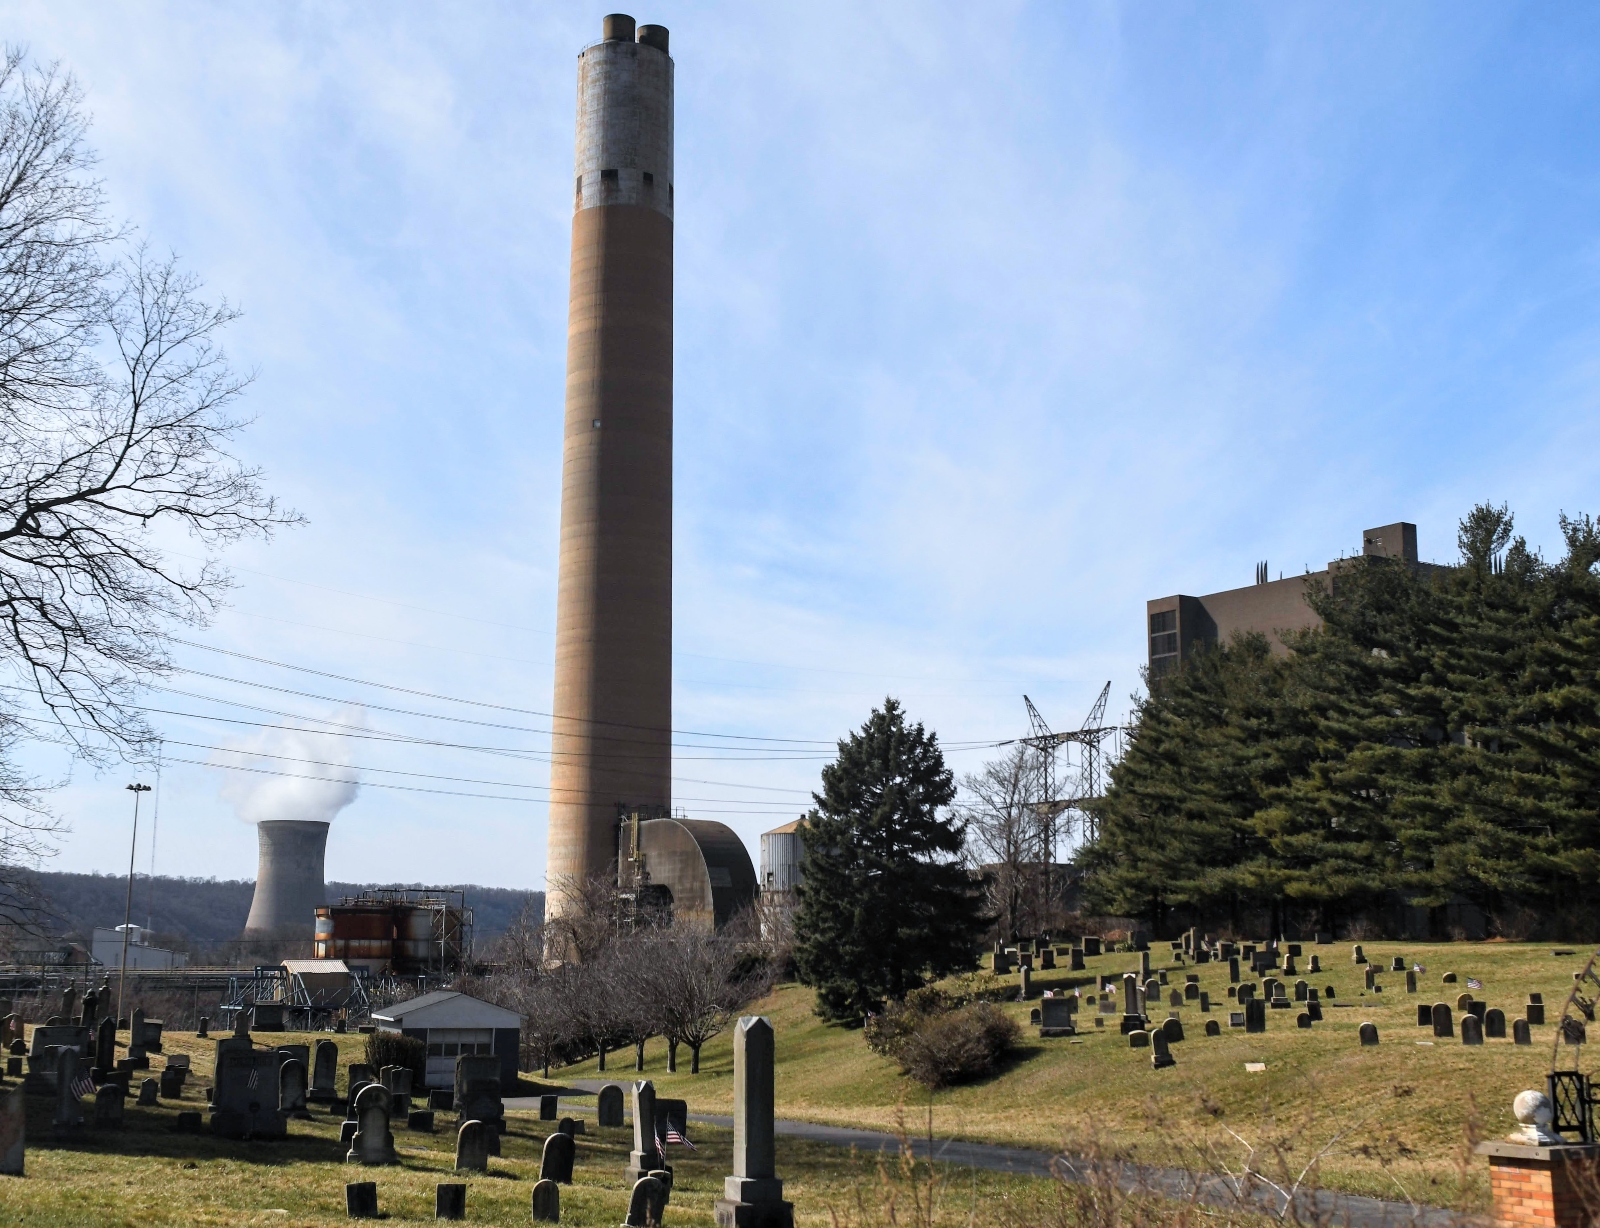 Two smokestacks tower over a graveyard.